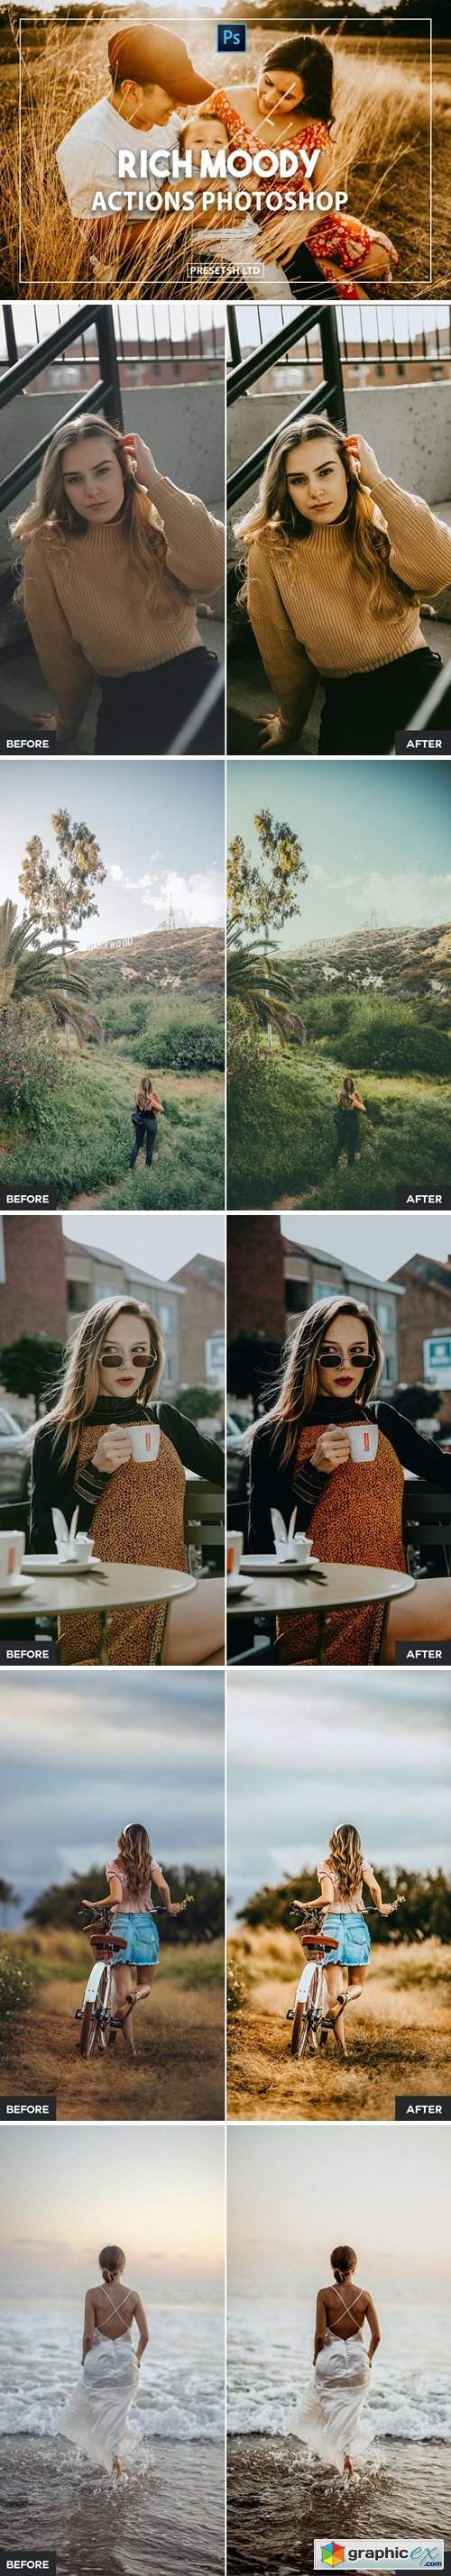  Rich Moody Photoshop Actions 